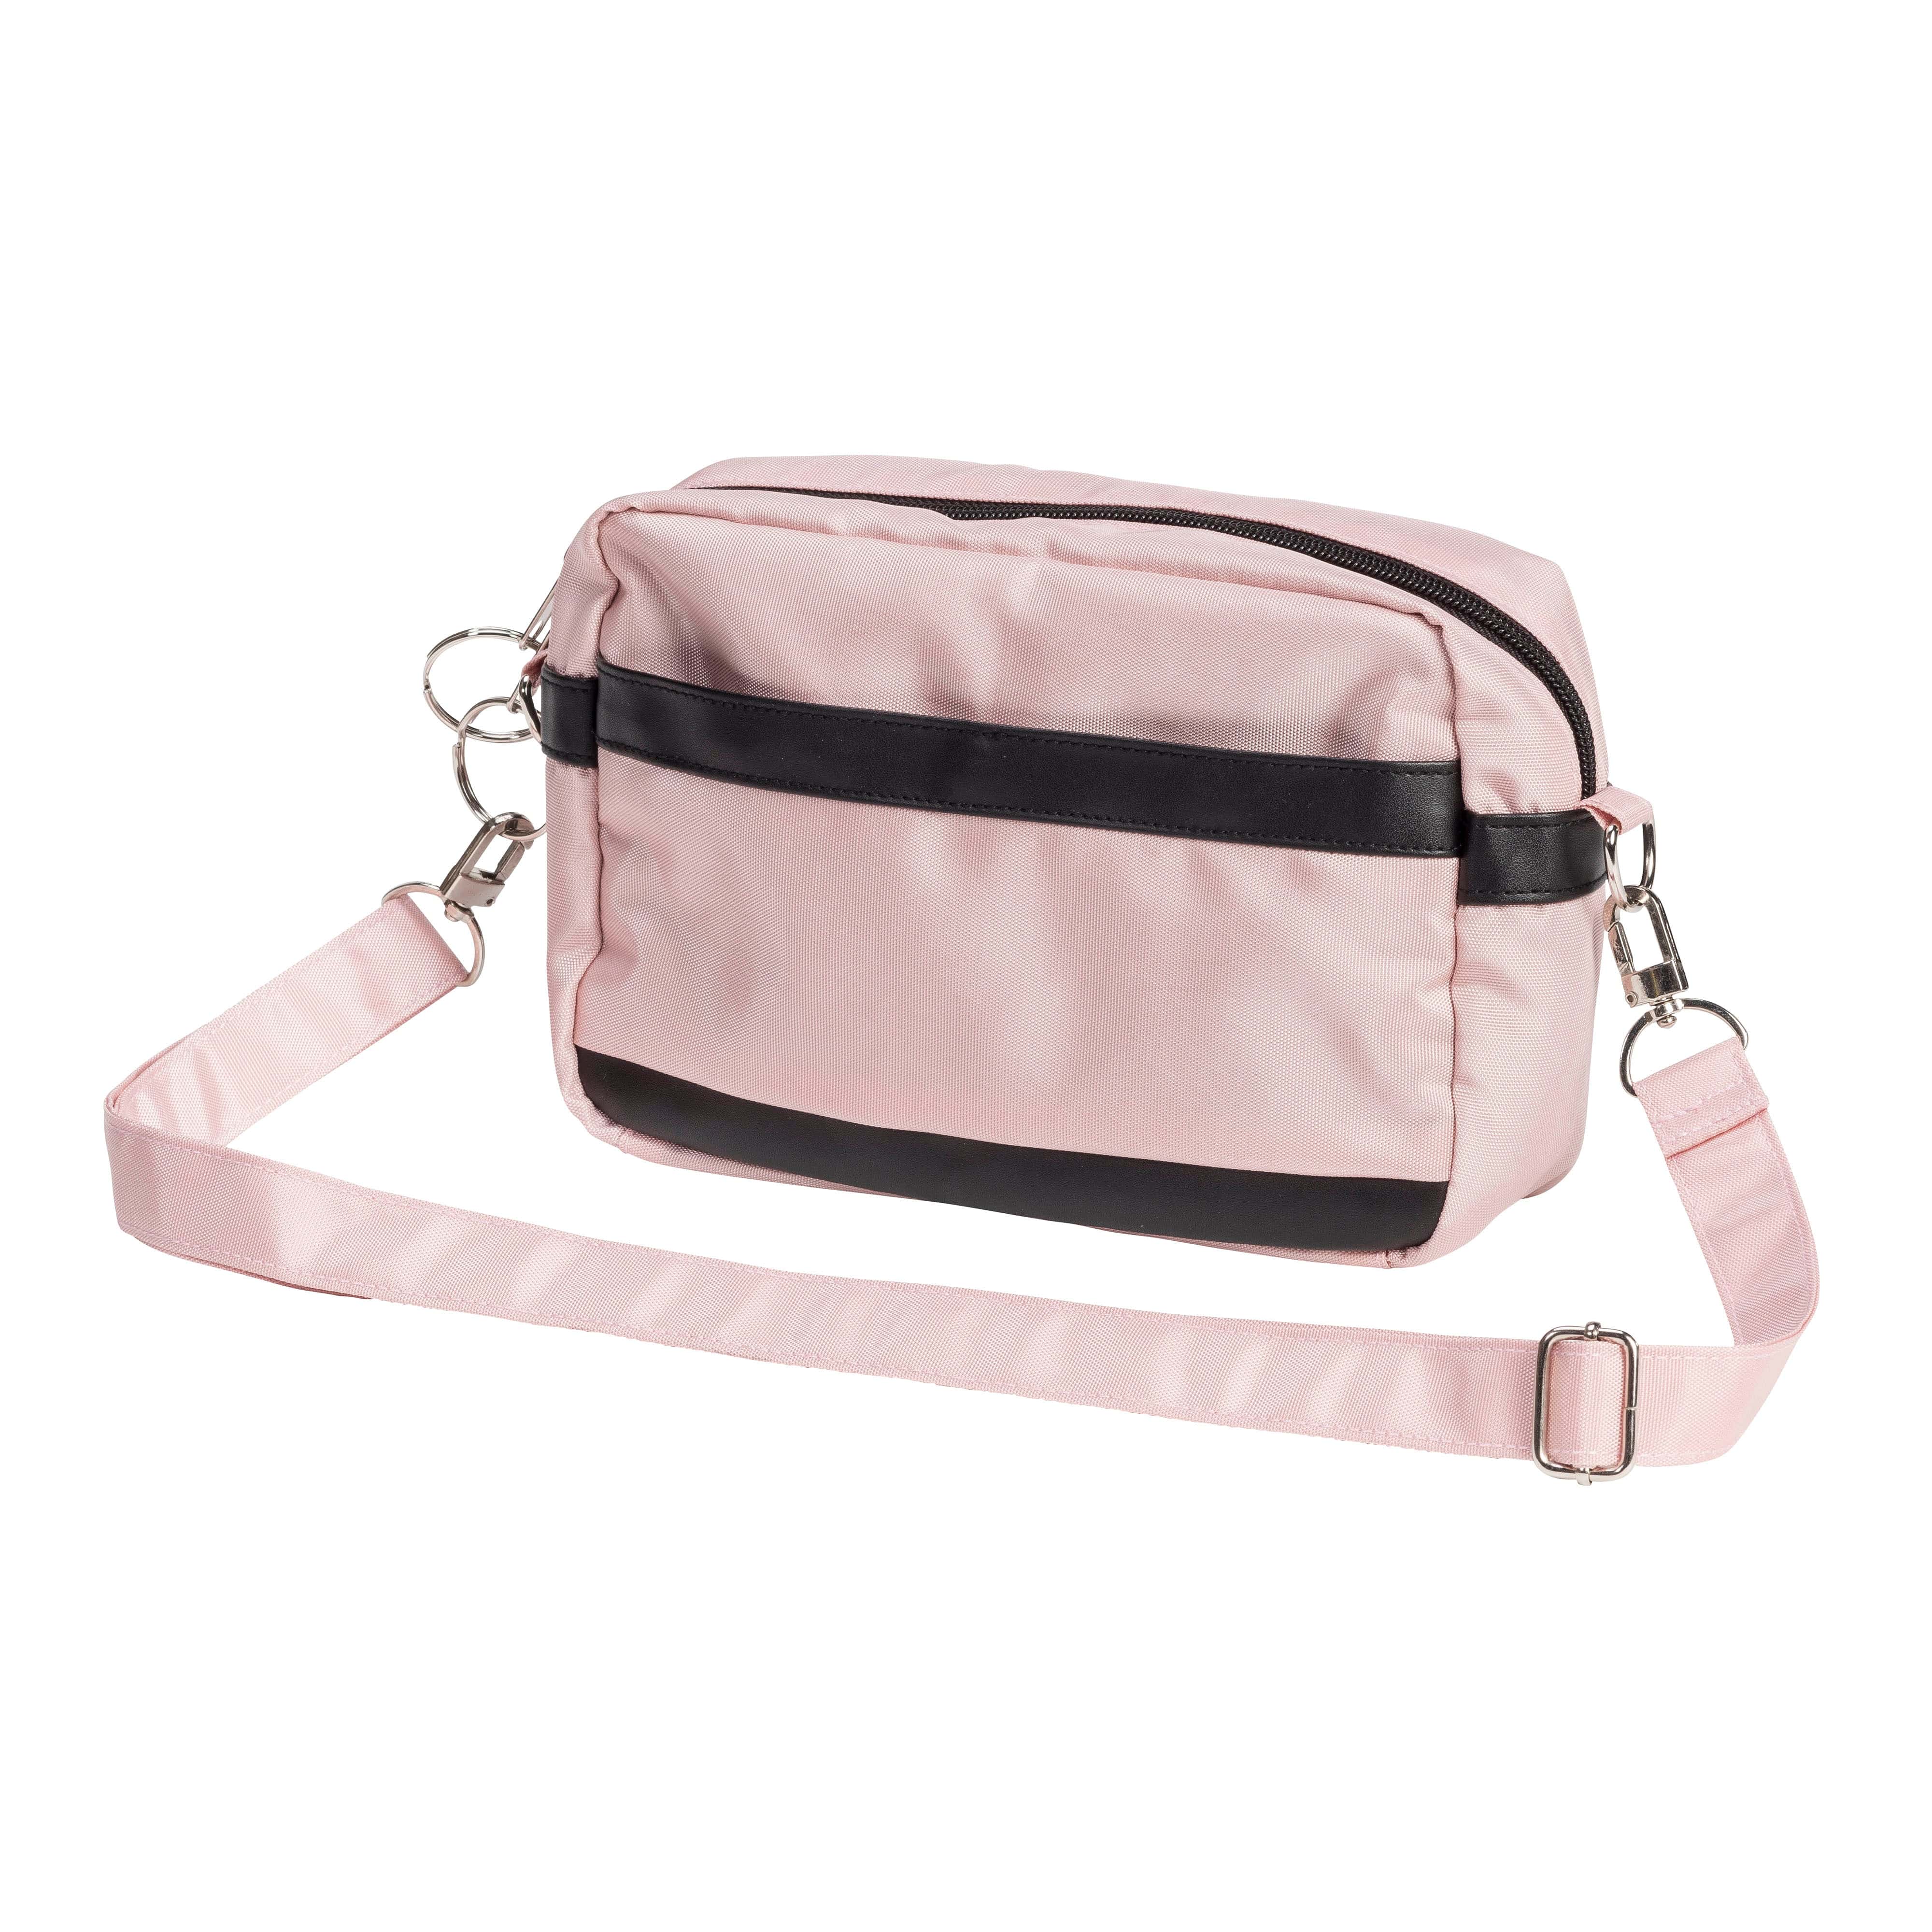 Drive Medical Walkers/Walker Accessories/Walker Carry Pouches and Baskets Pink Drive Medical Multi-Use Accessory Bag